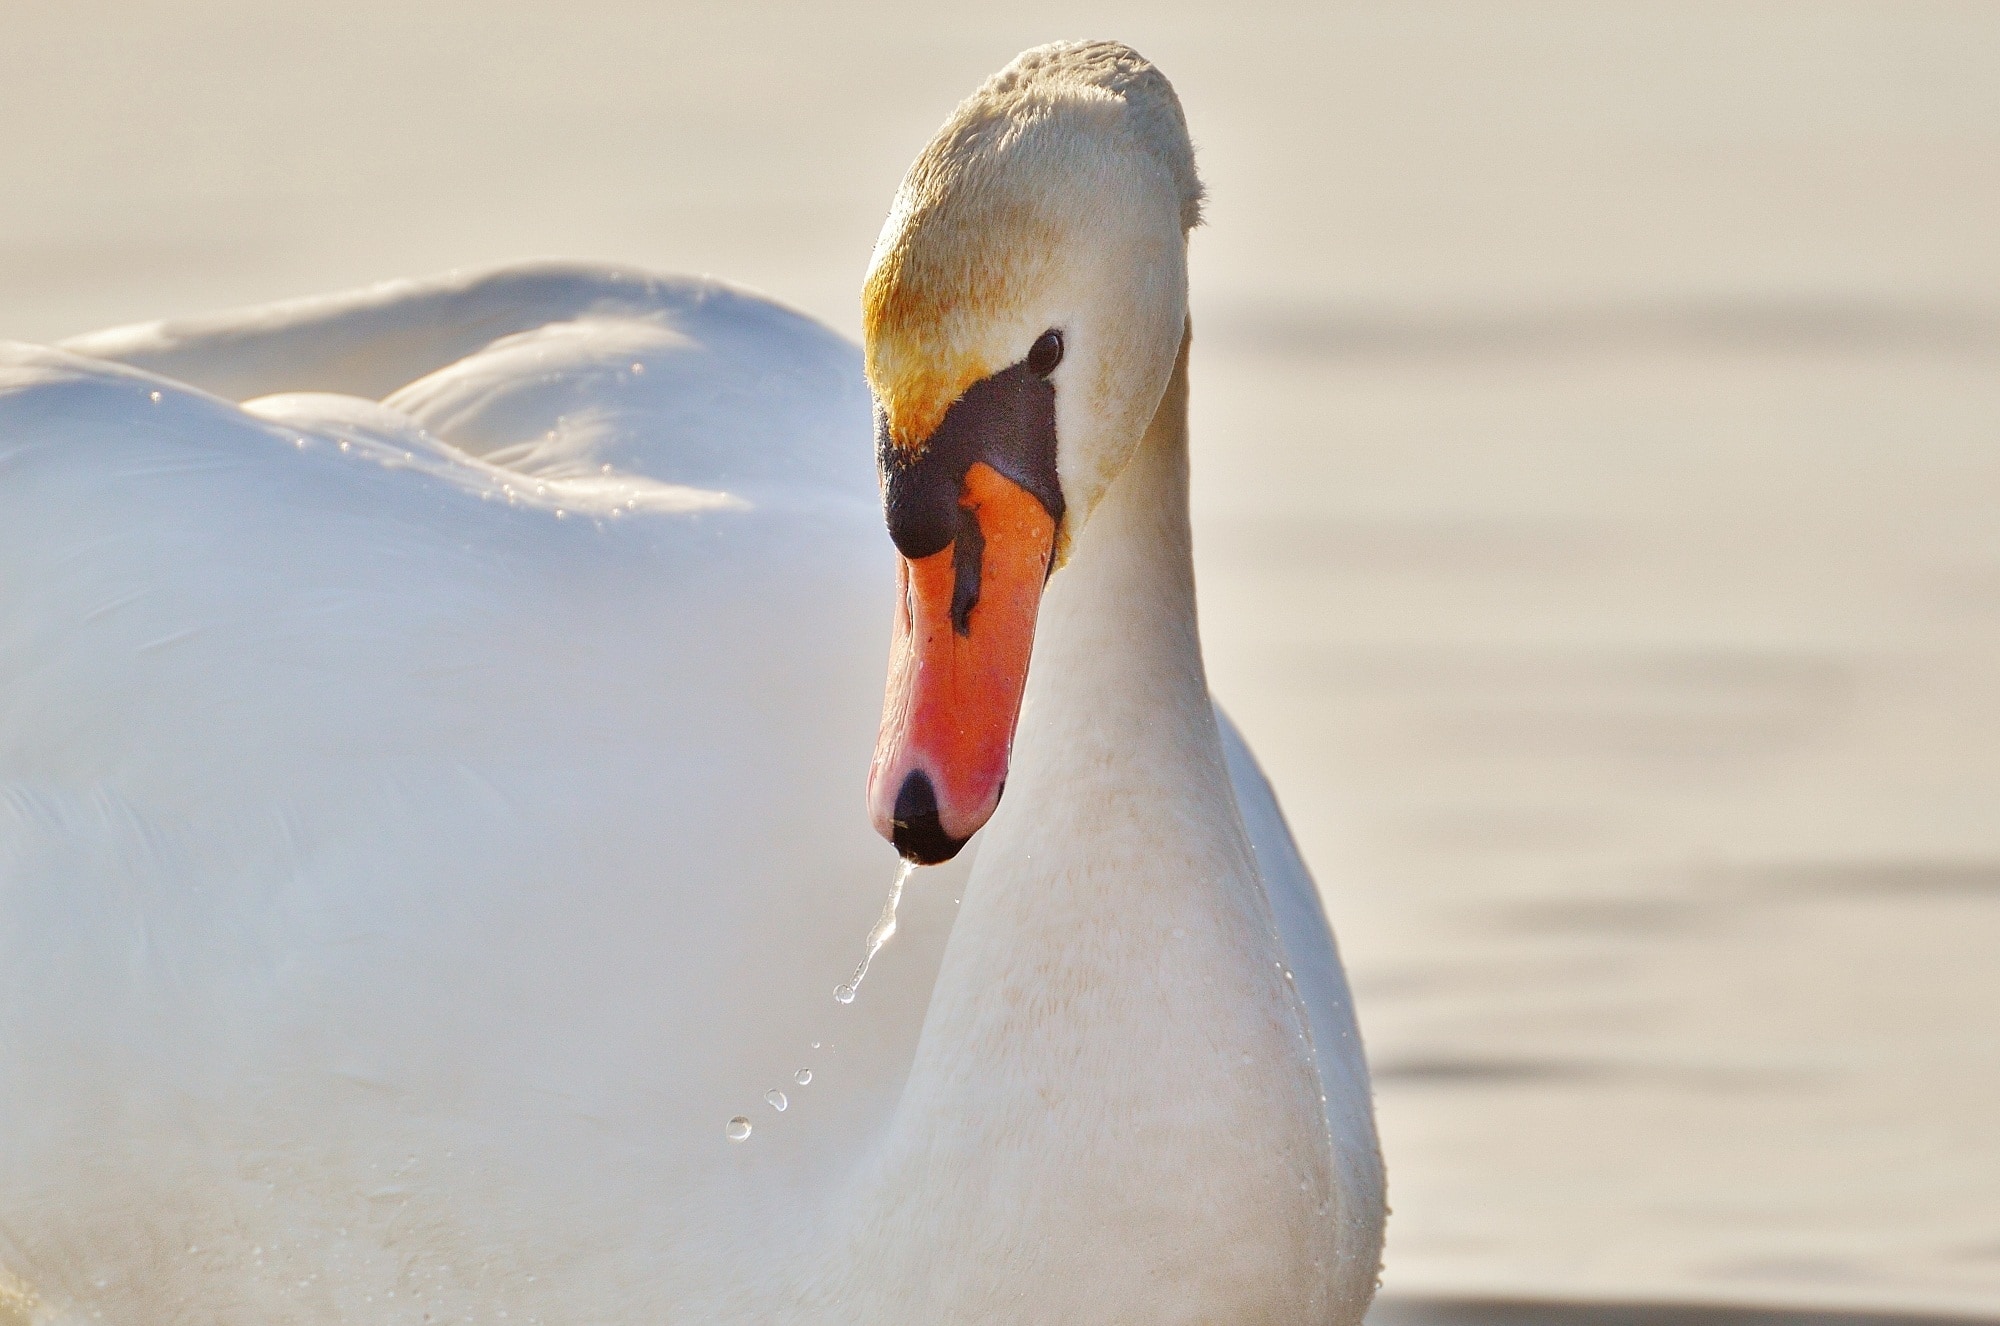 close up photo of swan